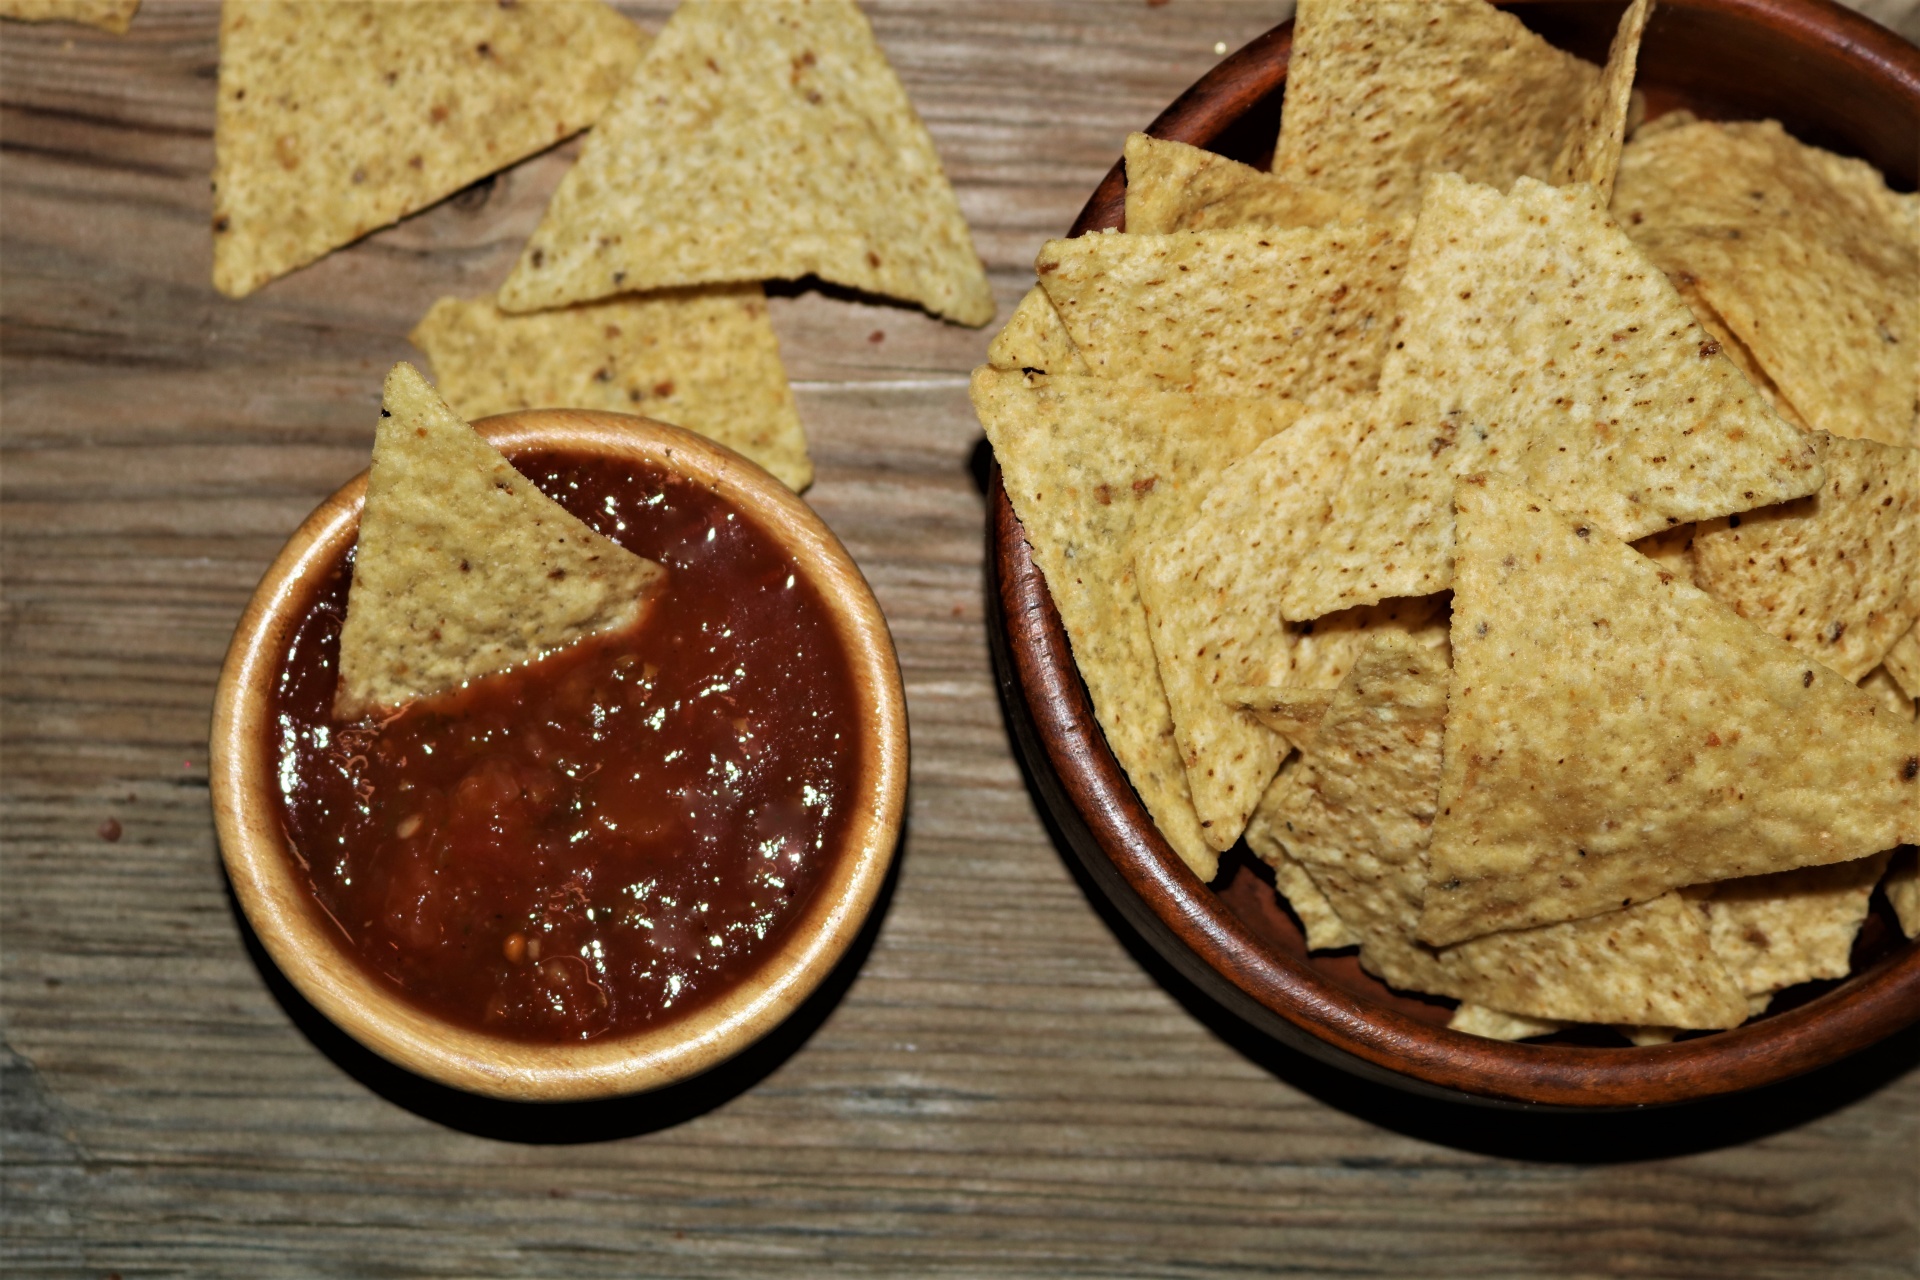 Top view of a bowl of picante sauce and a bowl of tortilla chips on a wood table.